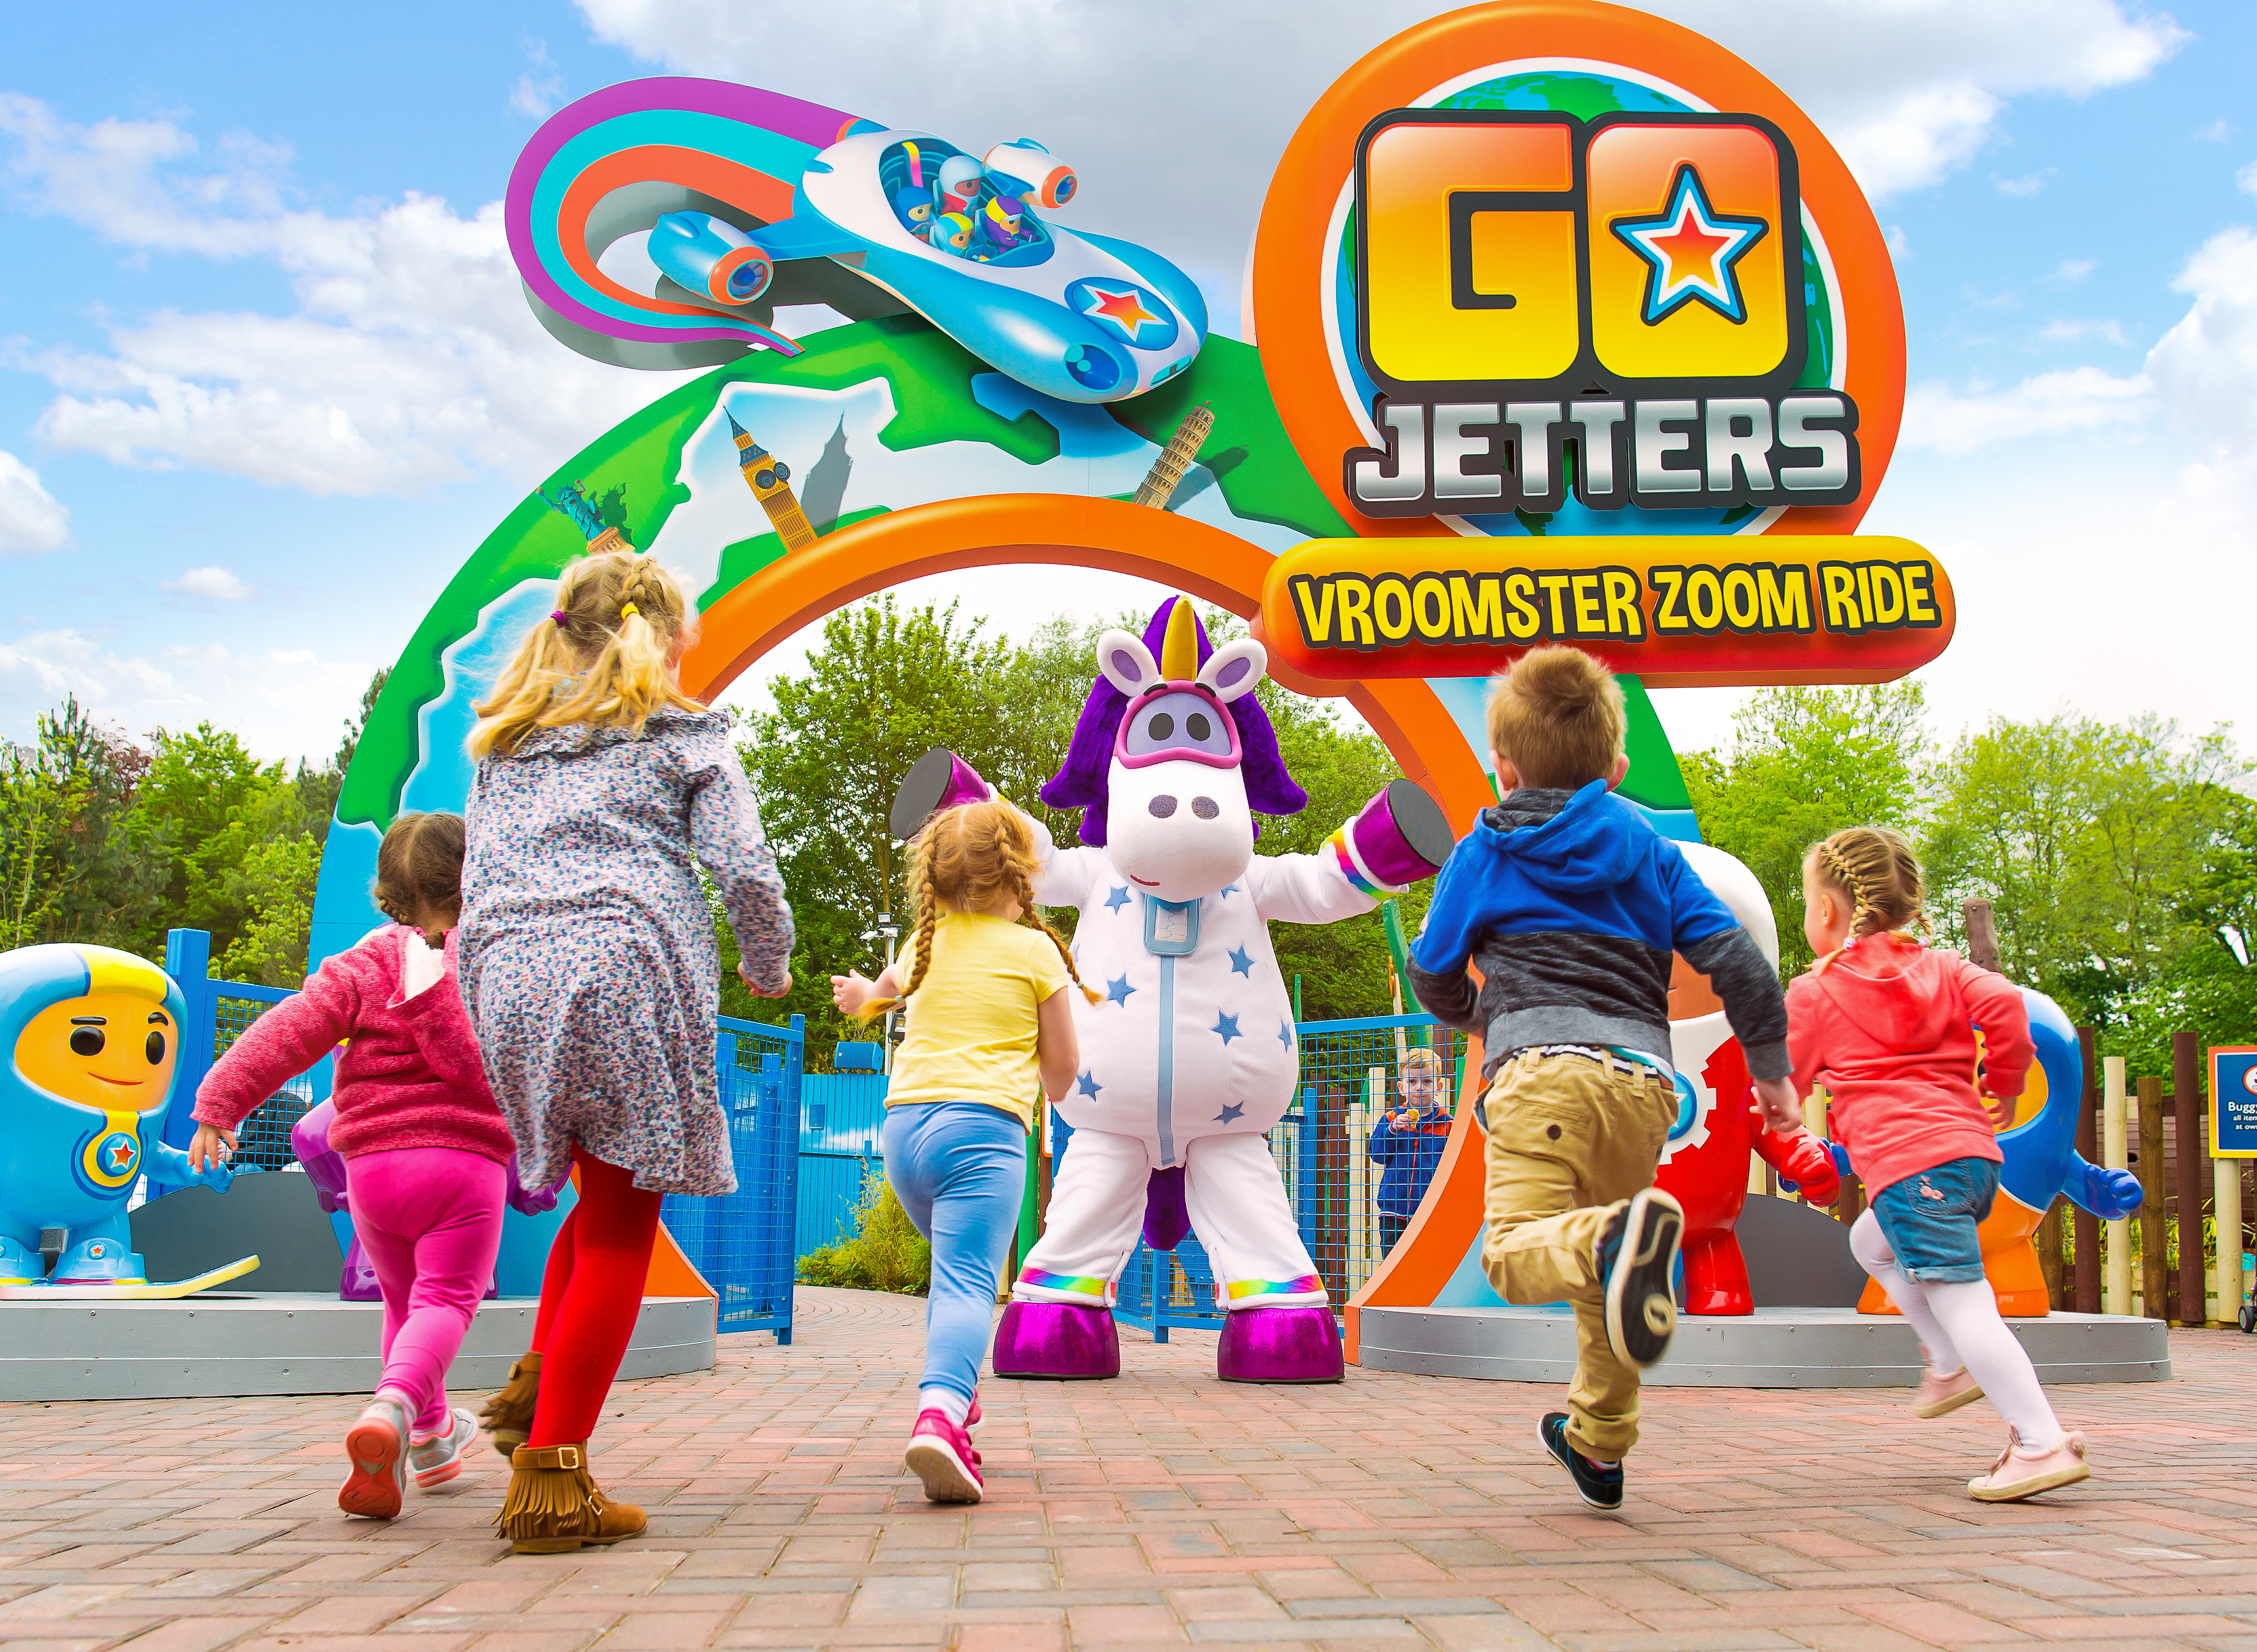 Go Jetters Vroomster Zoom Ride at CBeebies Land at Alton Towers Resort